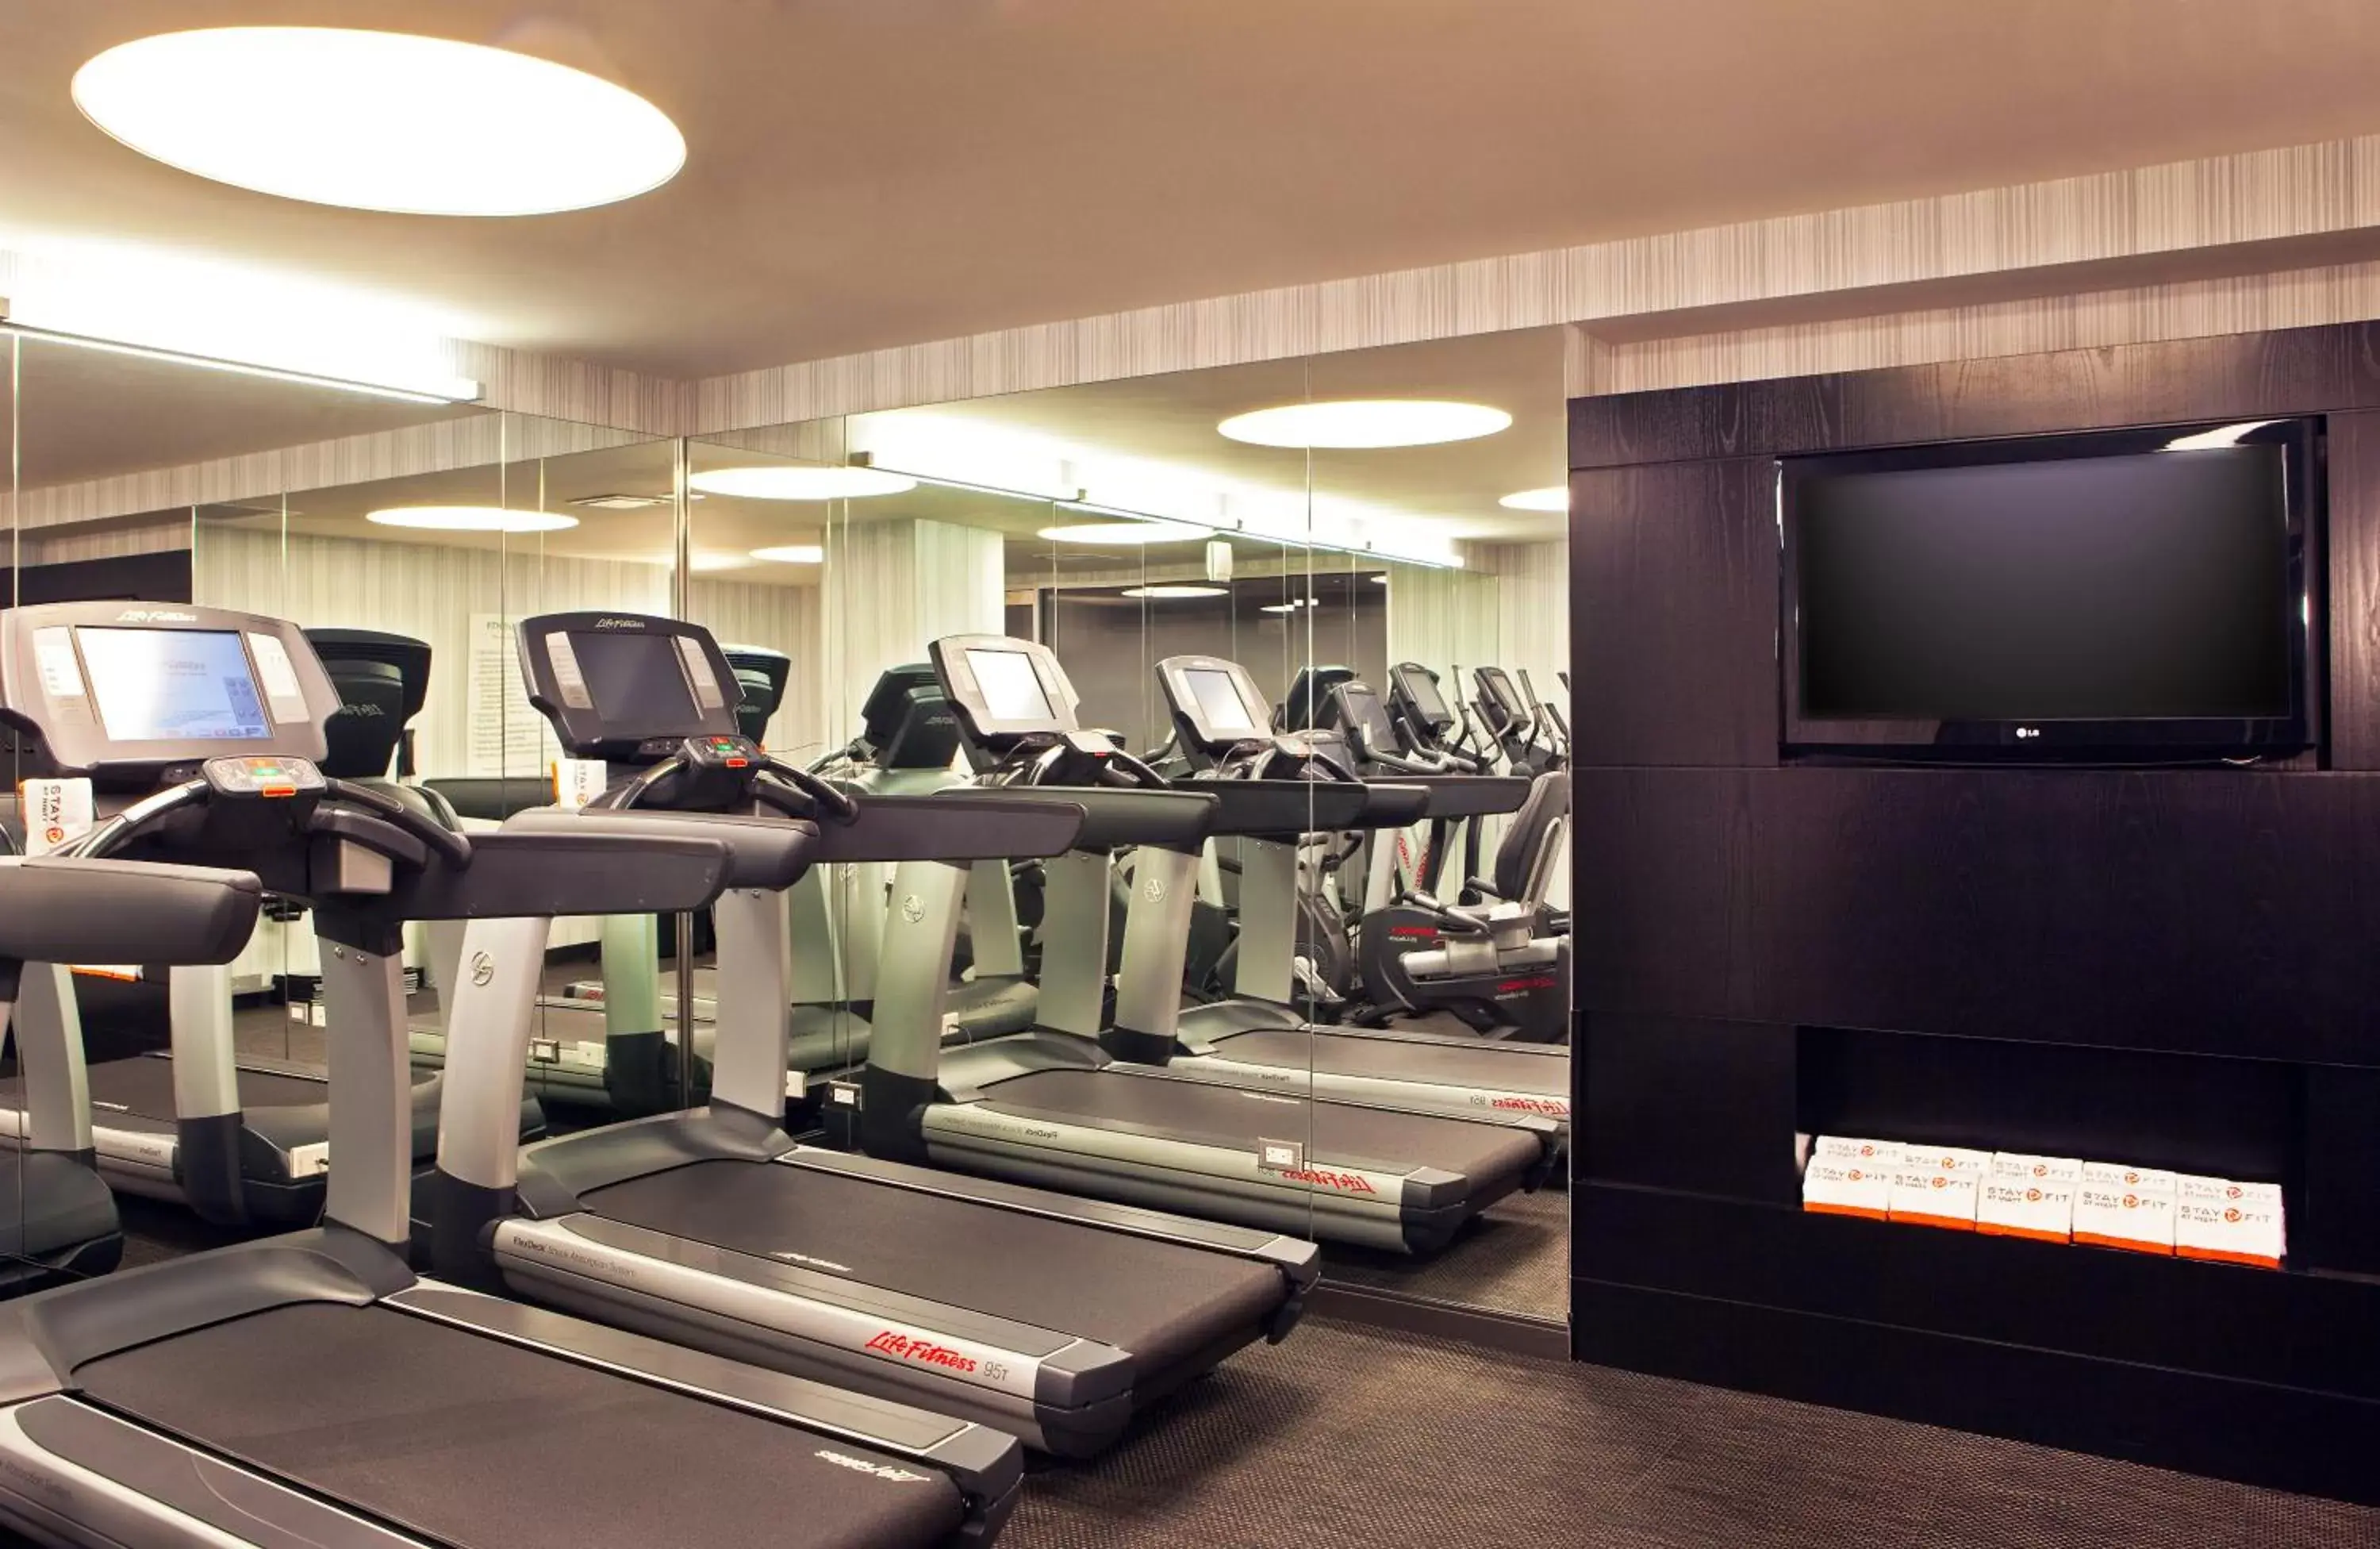 Fitness centre/facilities, Fitness Center/Facilities in Hotel 48LEX New York